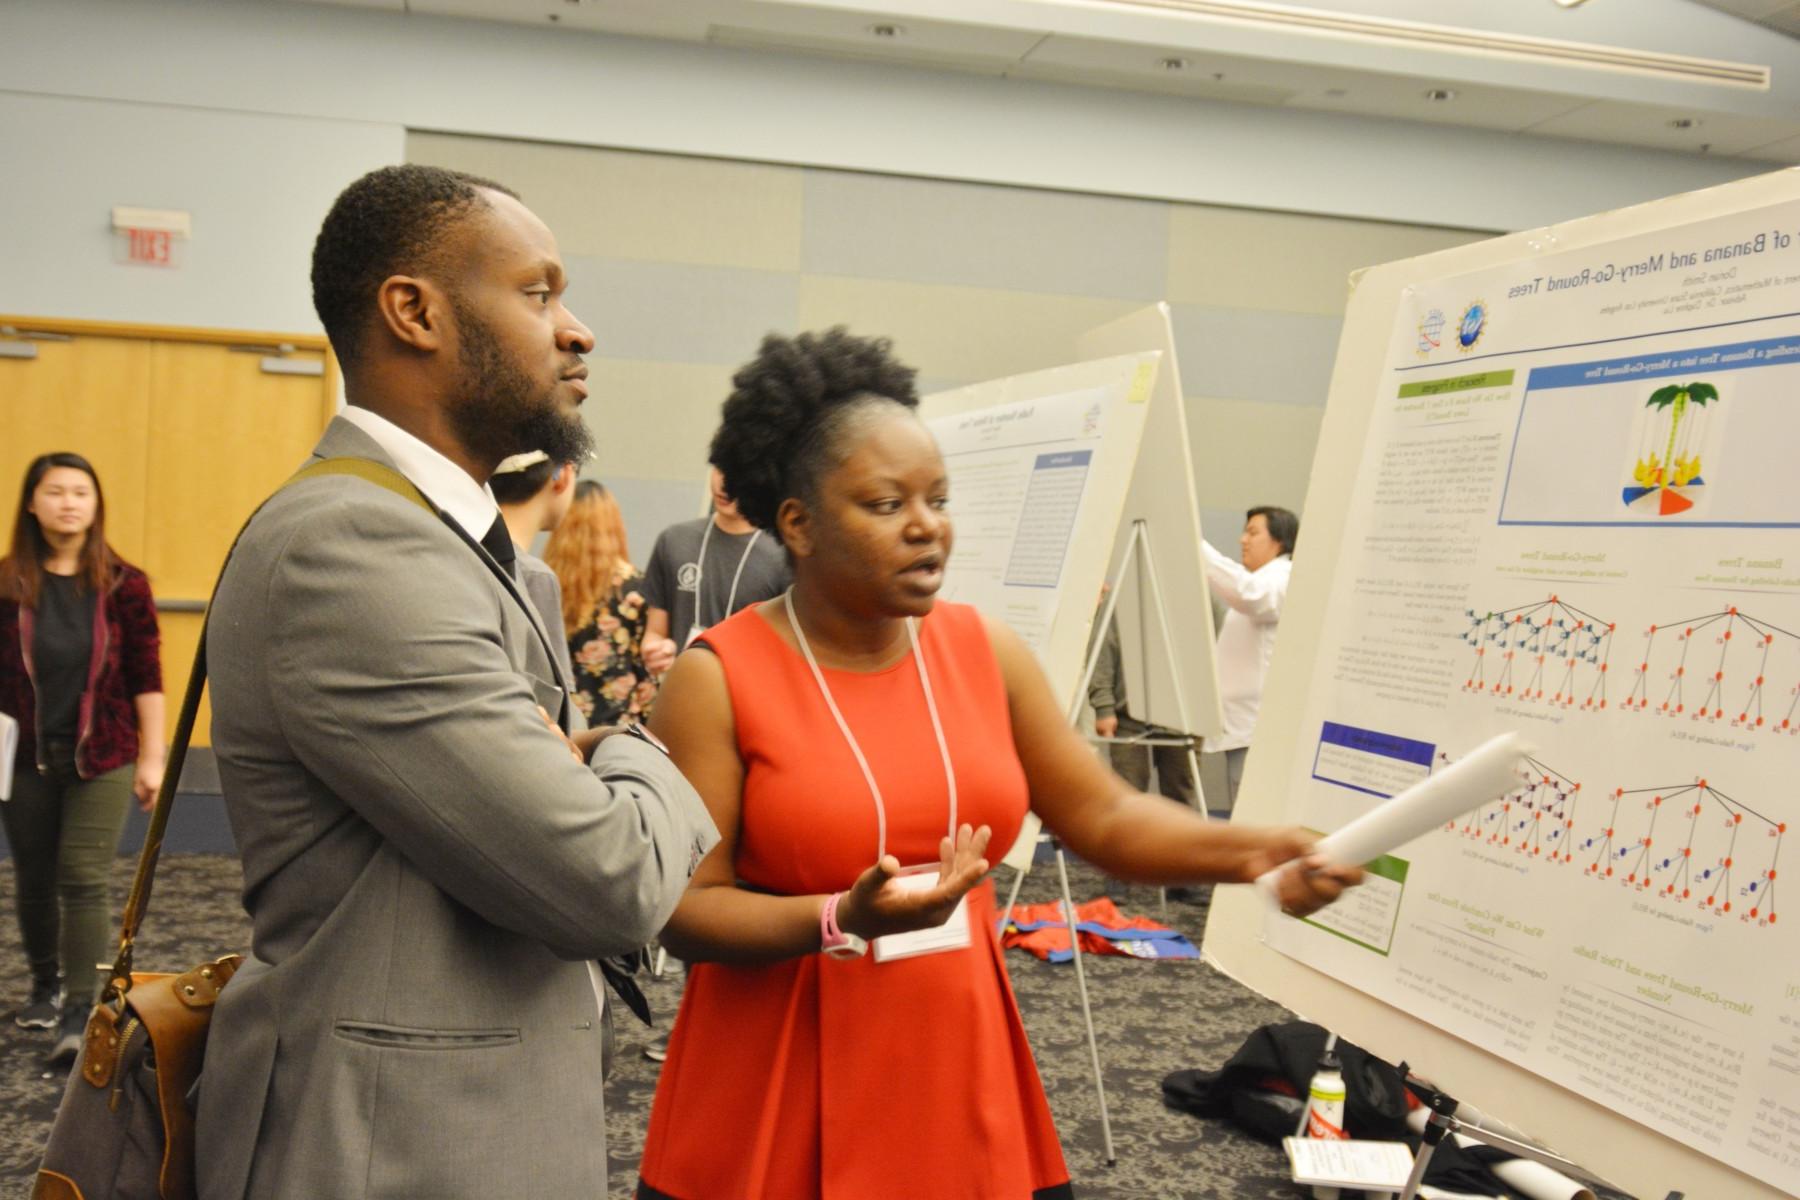 student discussing her poster presentation with attendee